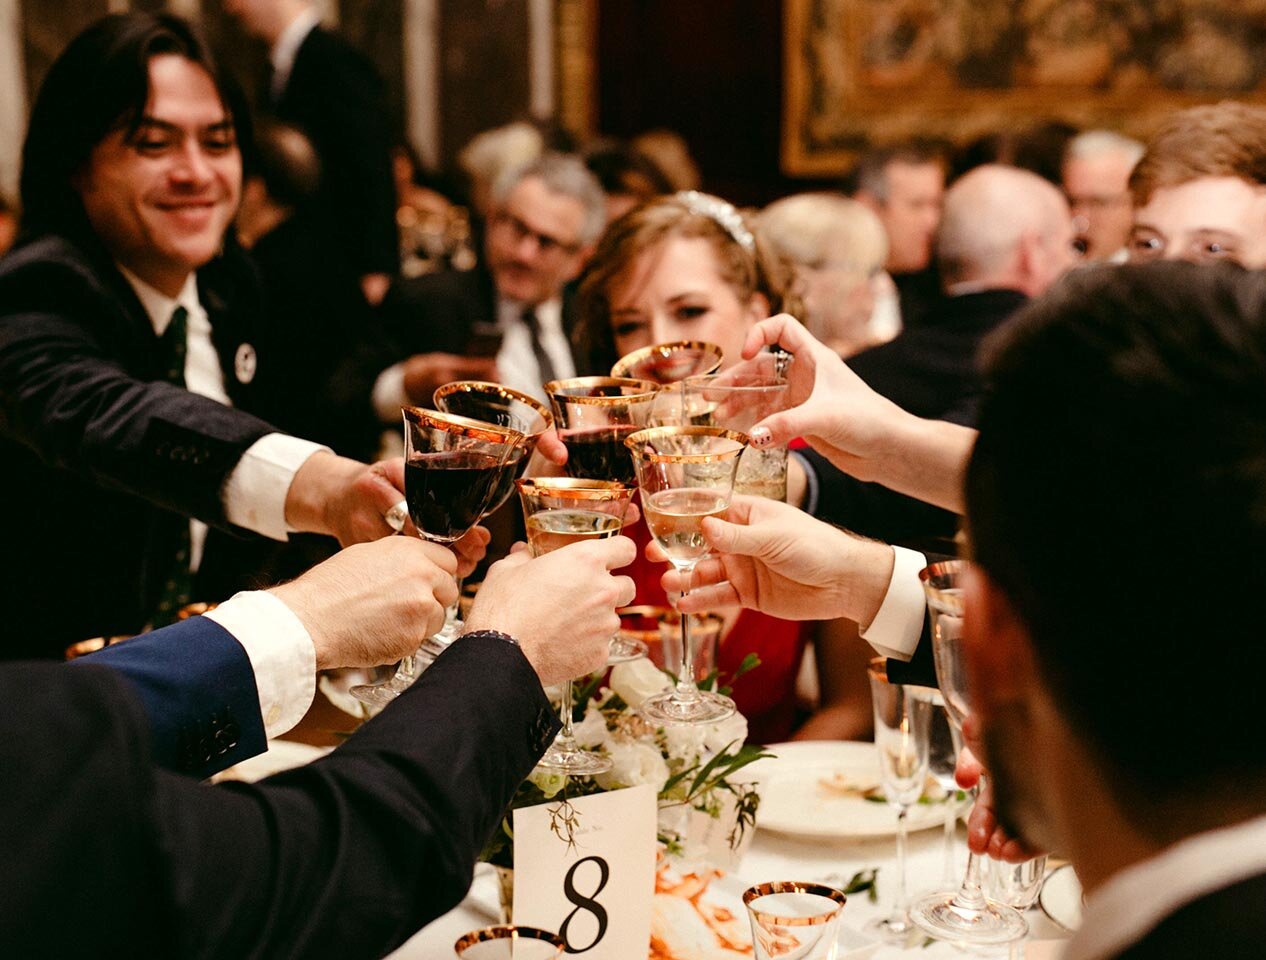 Wedding guests raise their glasses in a toast.